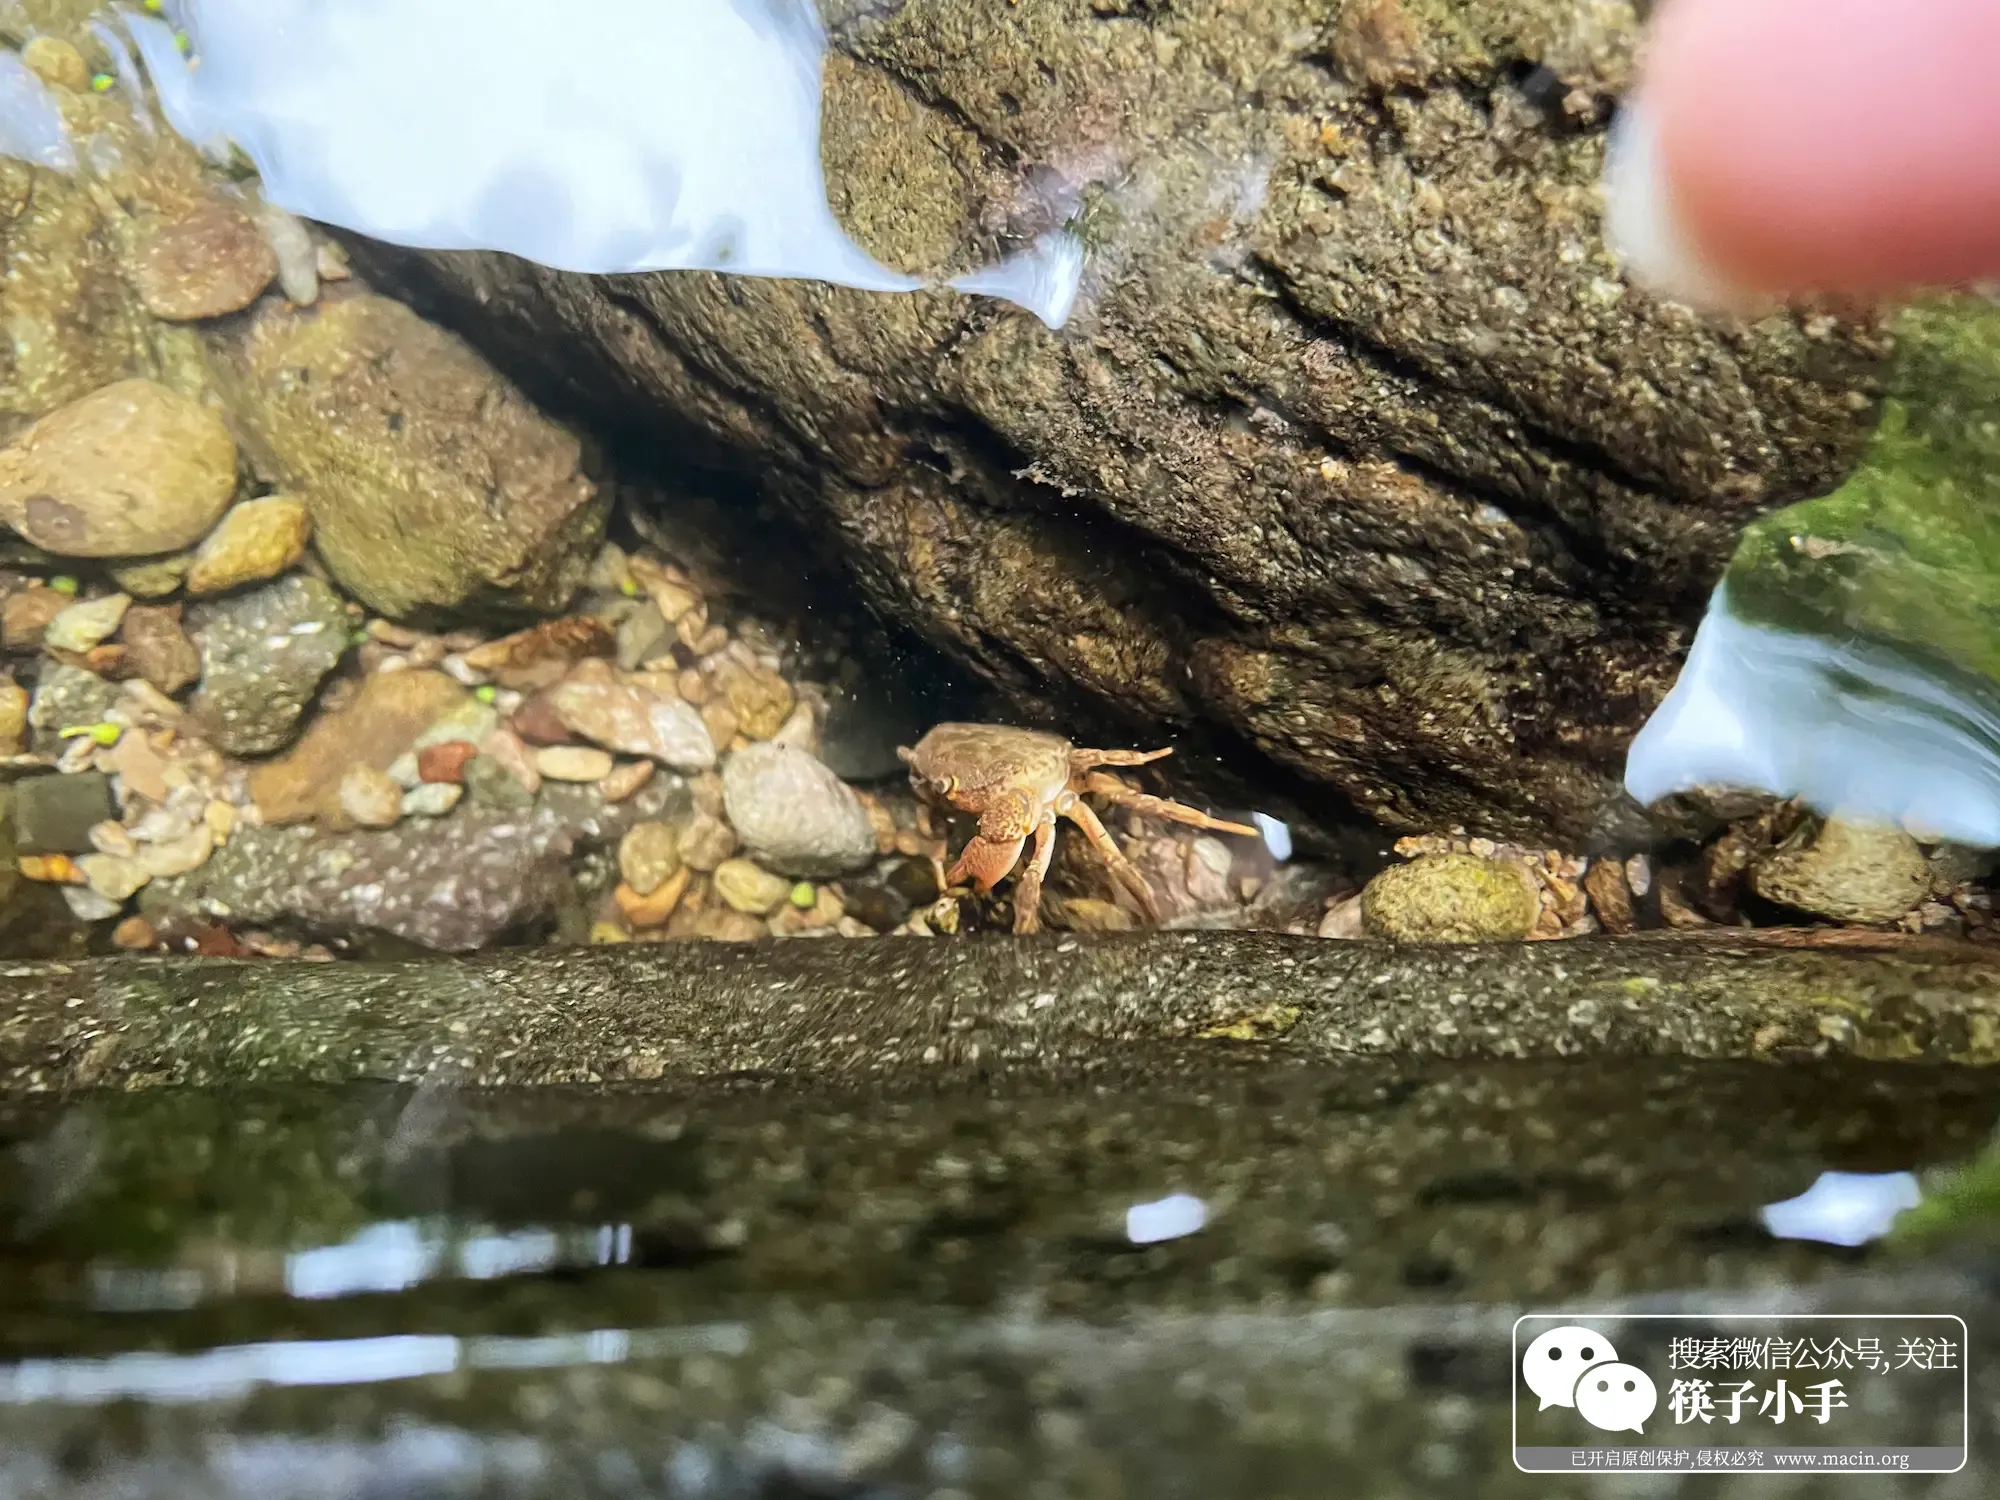 find small crab